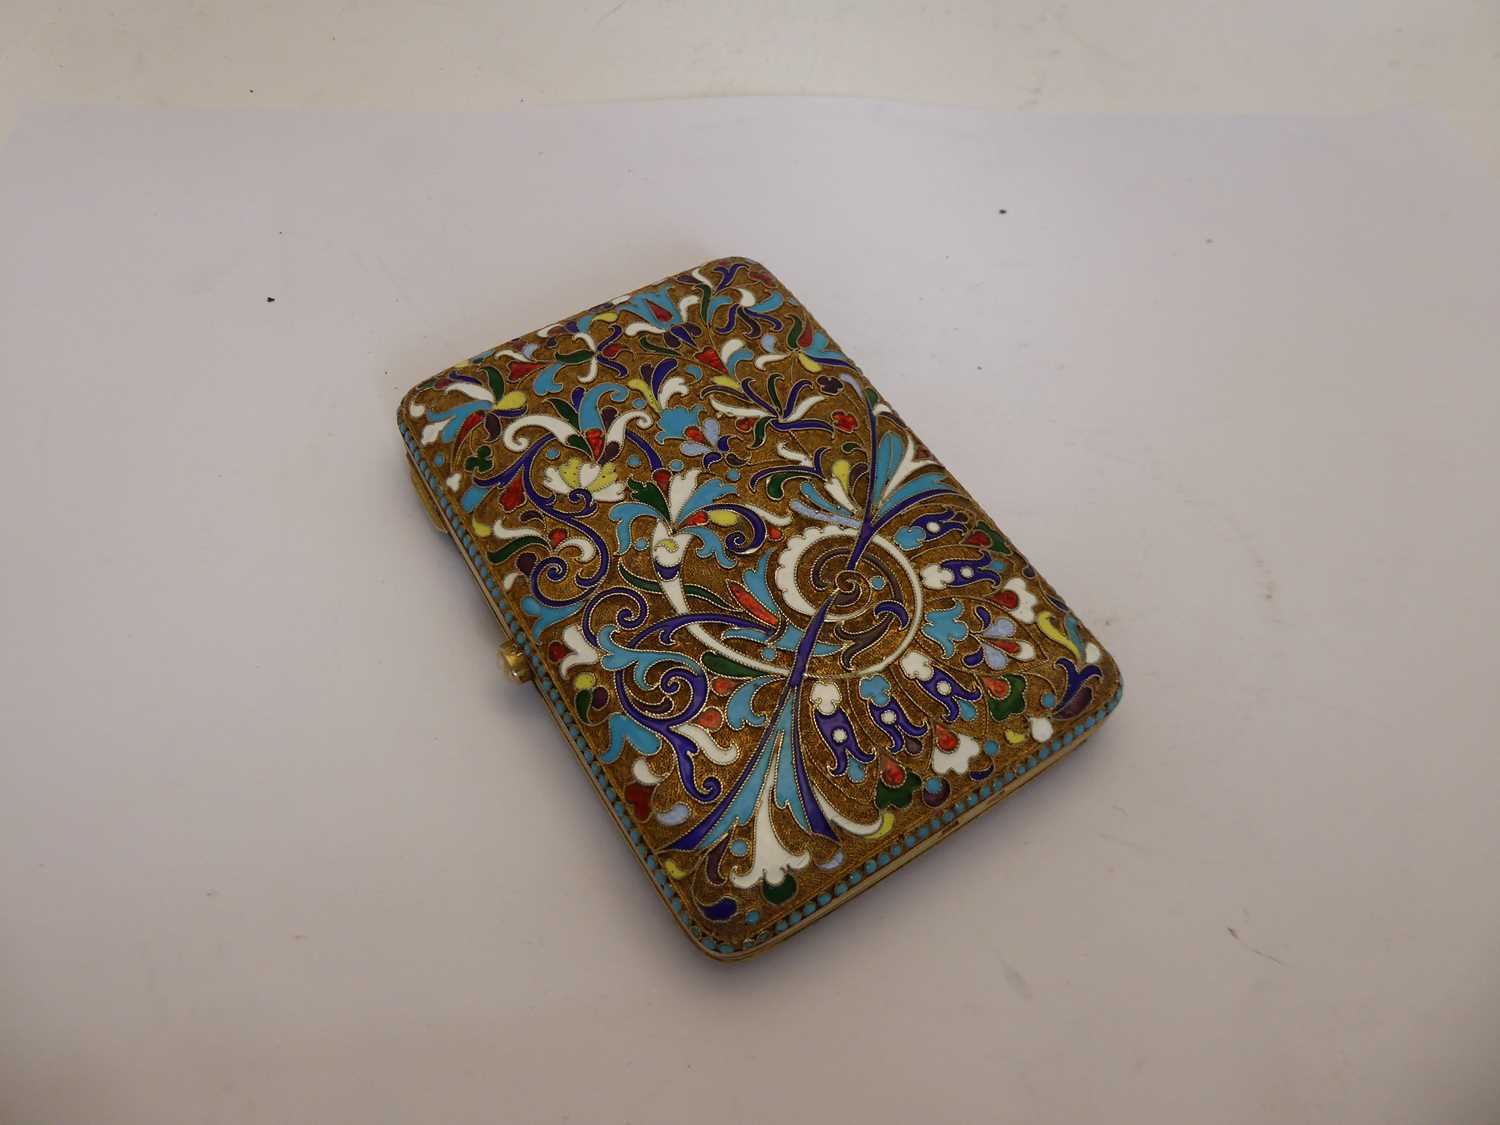 A Russian Silver-Gilt and Enamel Cigarette-Case, by Nicholai Zugeryev, Moscow, 1898-1914, Assay Mas - Image 4 of 6